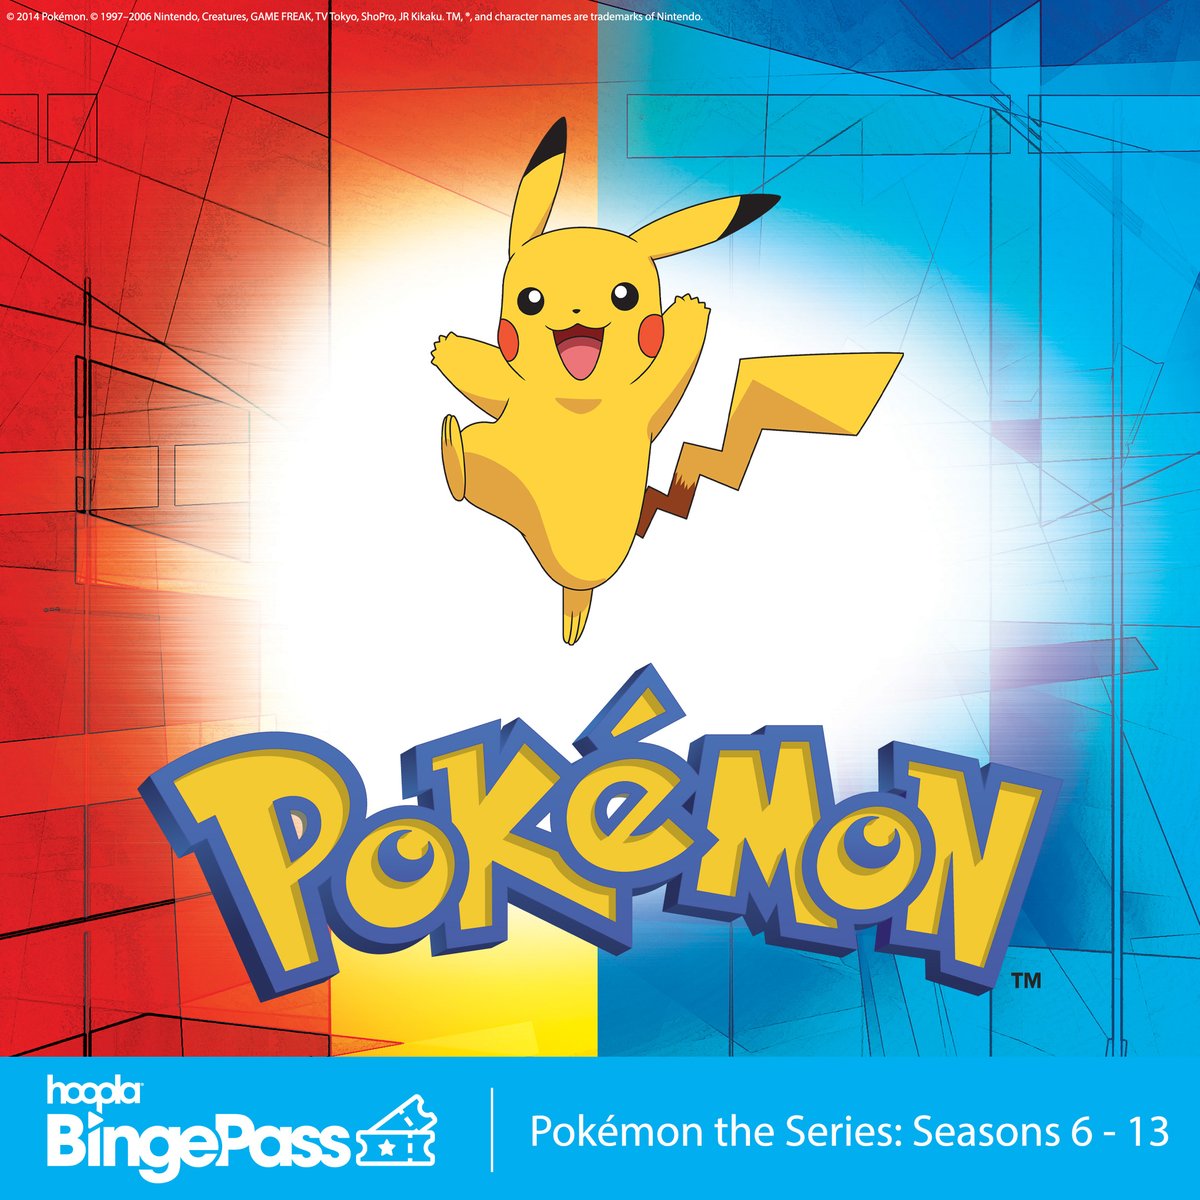 Gotta watch 'em all! Or at least, seasons 6-13. All available for instant streaming, no waiting - and only one borrow on Hoopla! bit.ly/4aV4EYd #pokemon